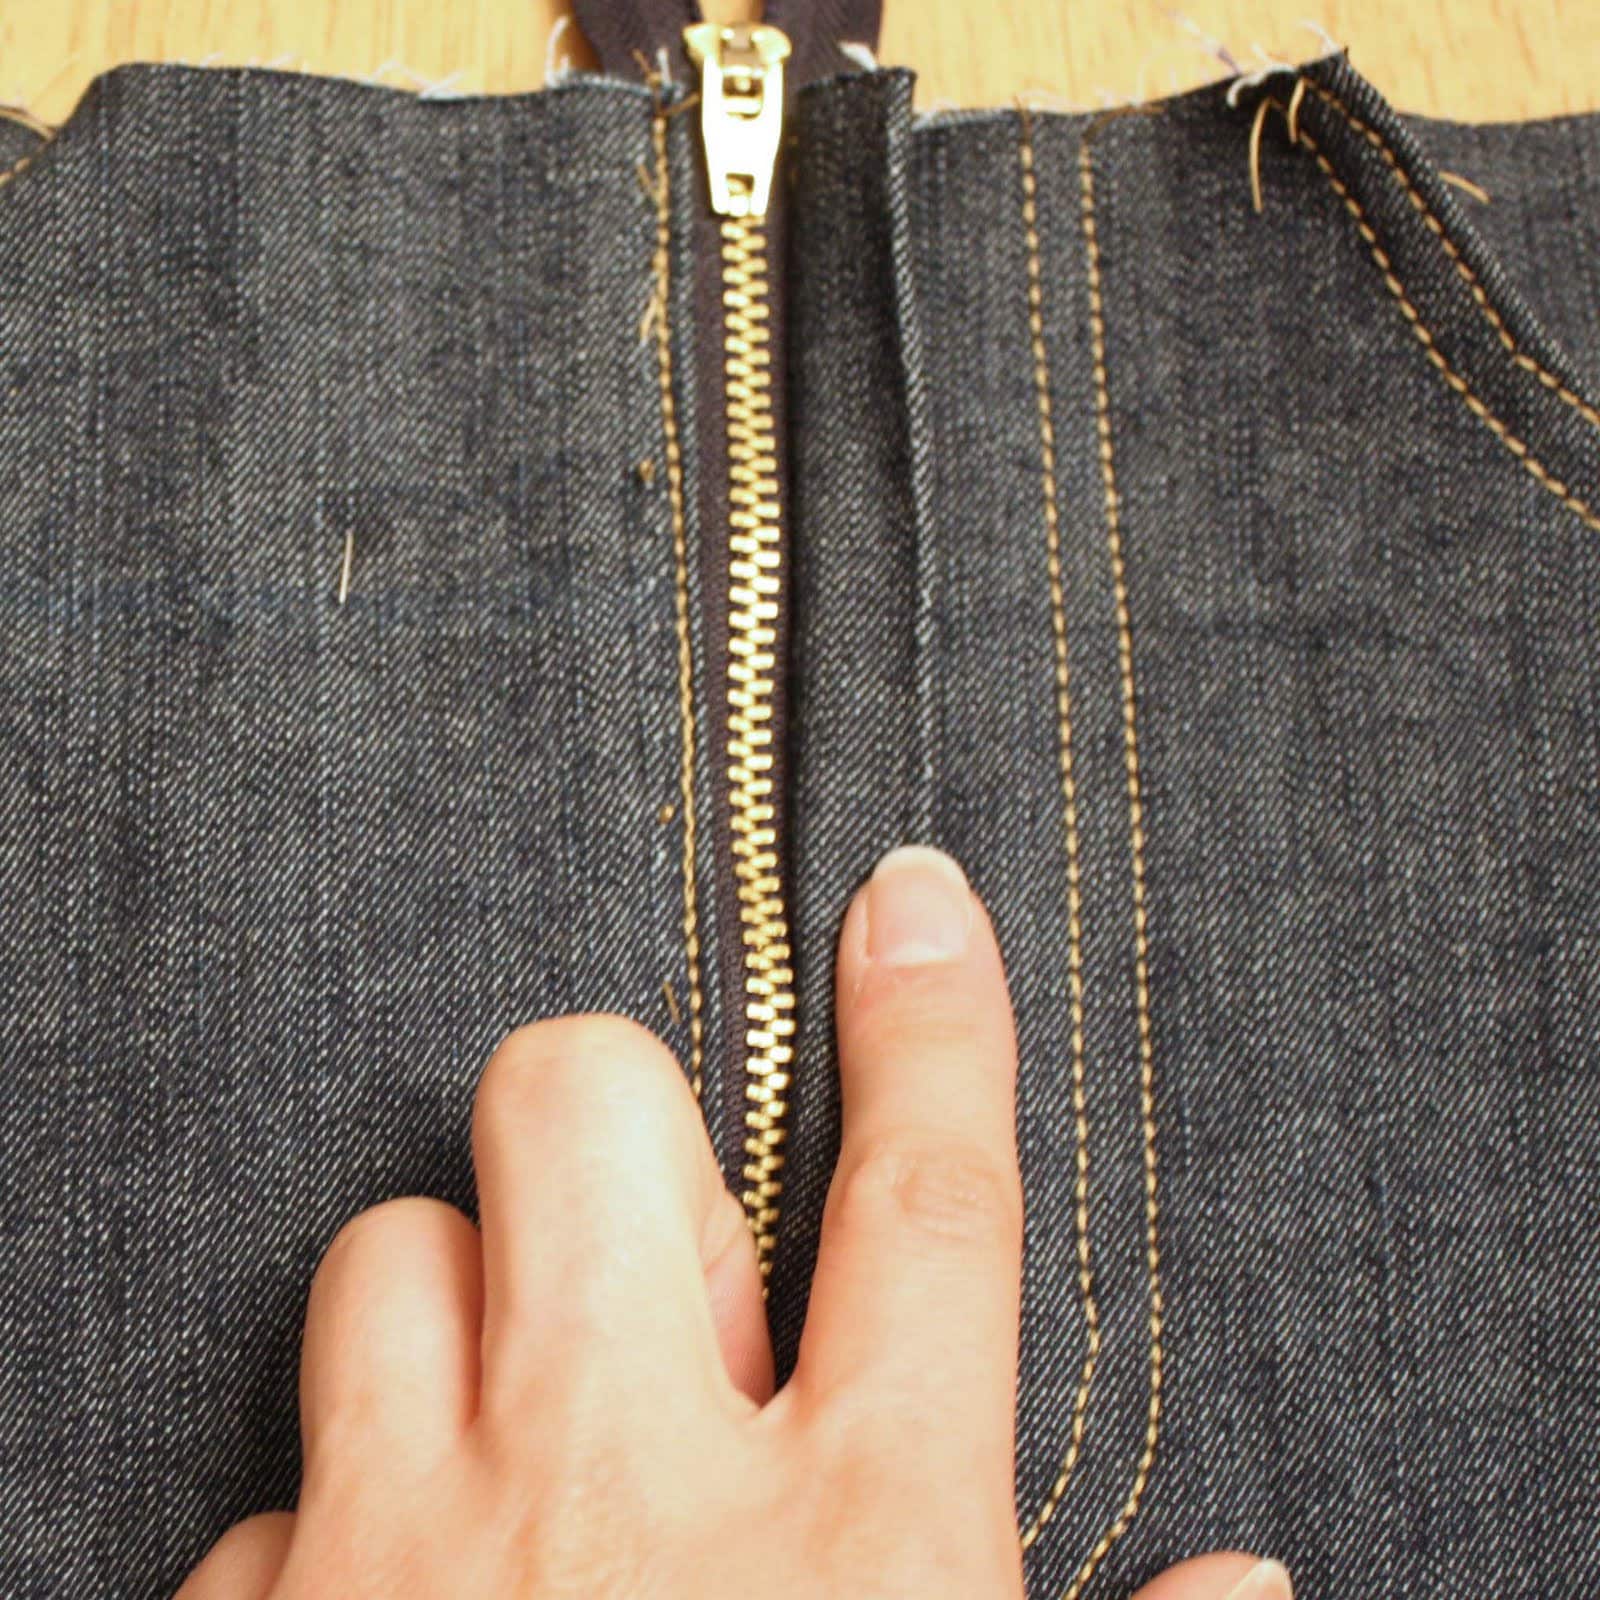 How to Sew a Zipper Fly - Melly Sews